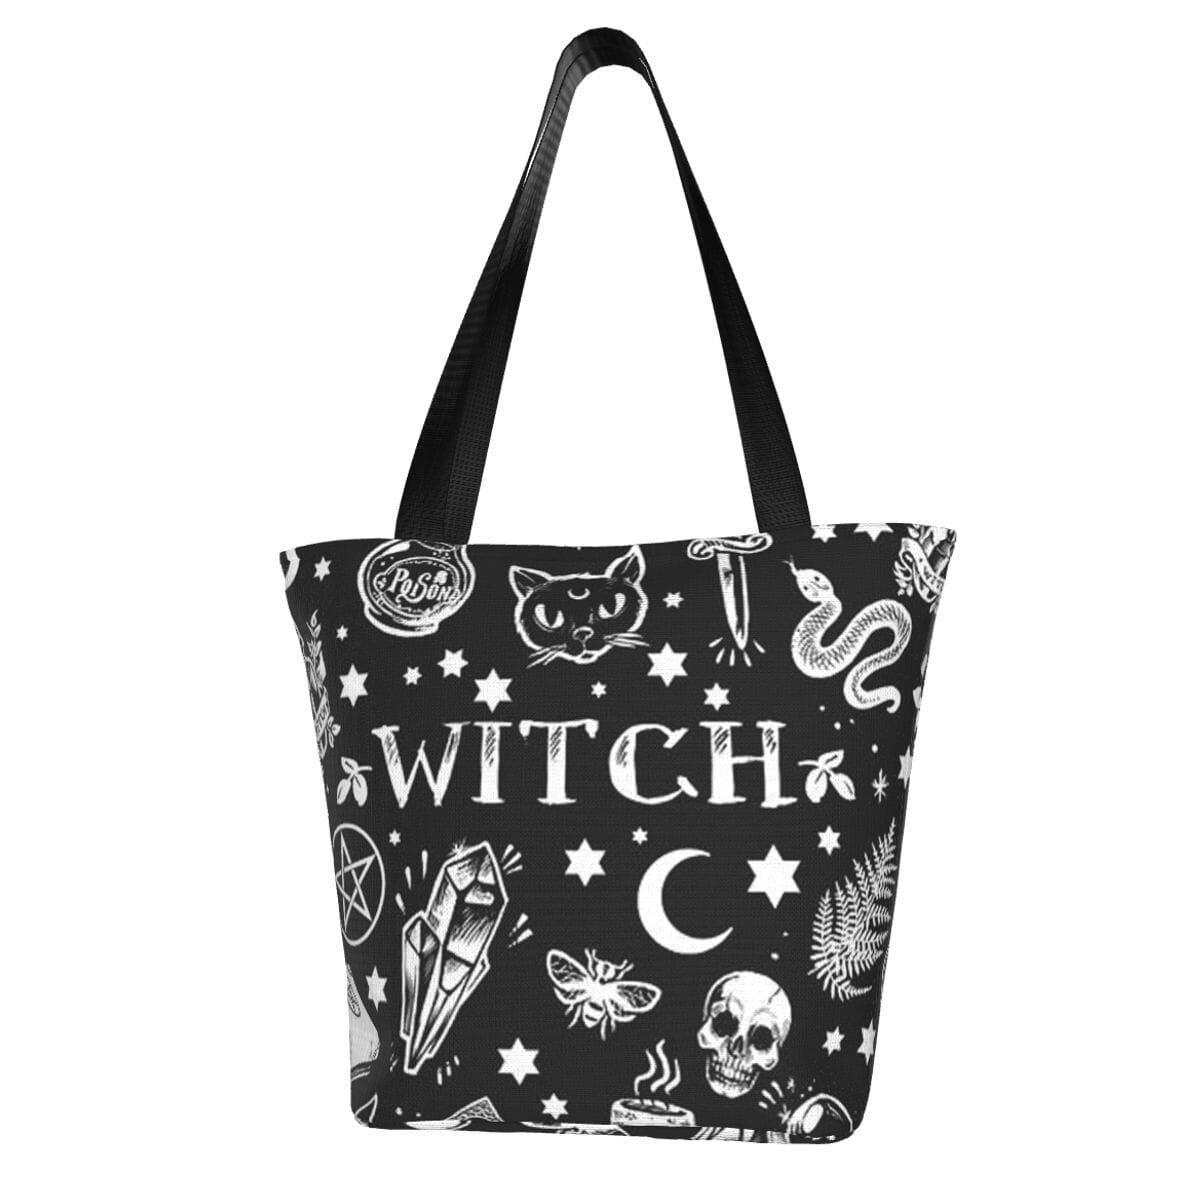 Witchy Handbag The Store Bags 